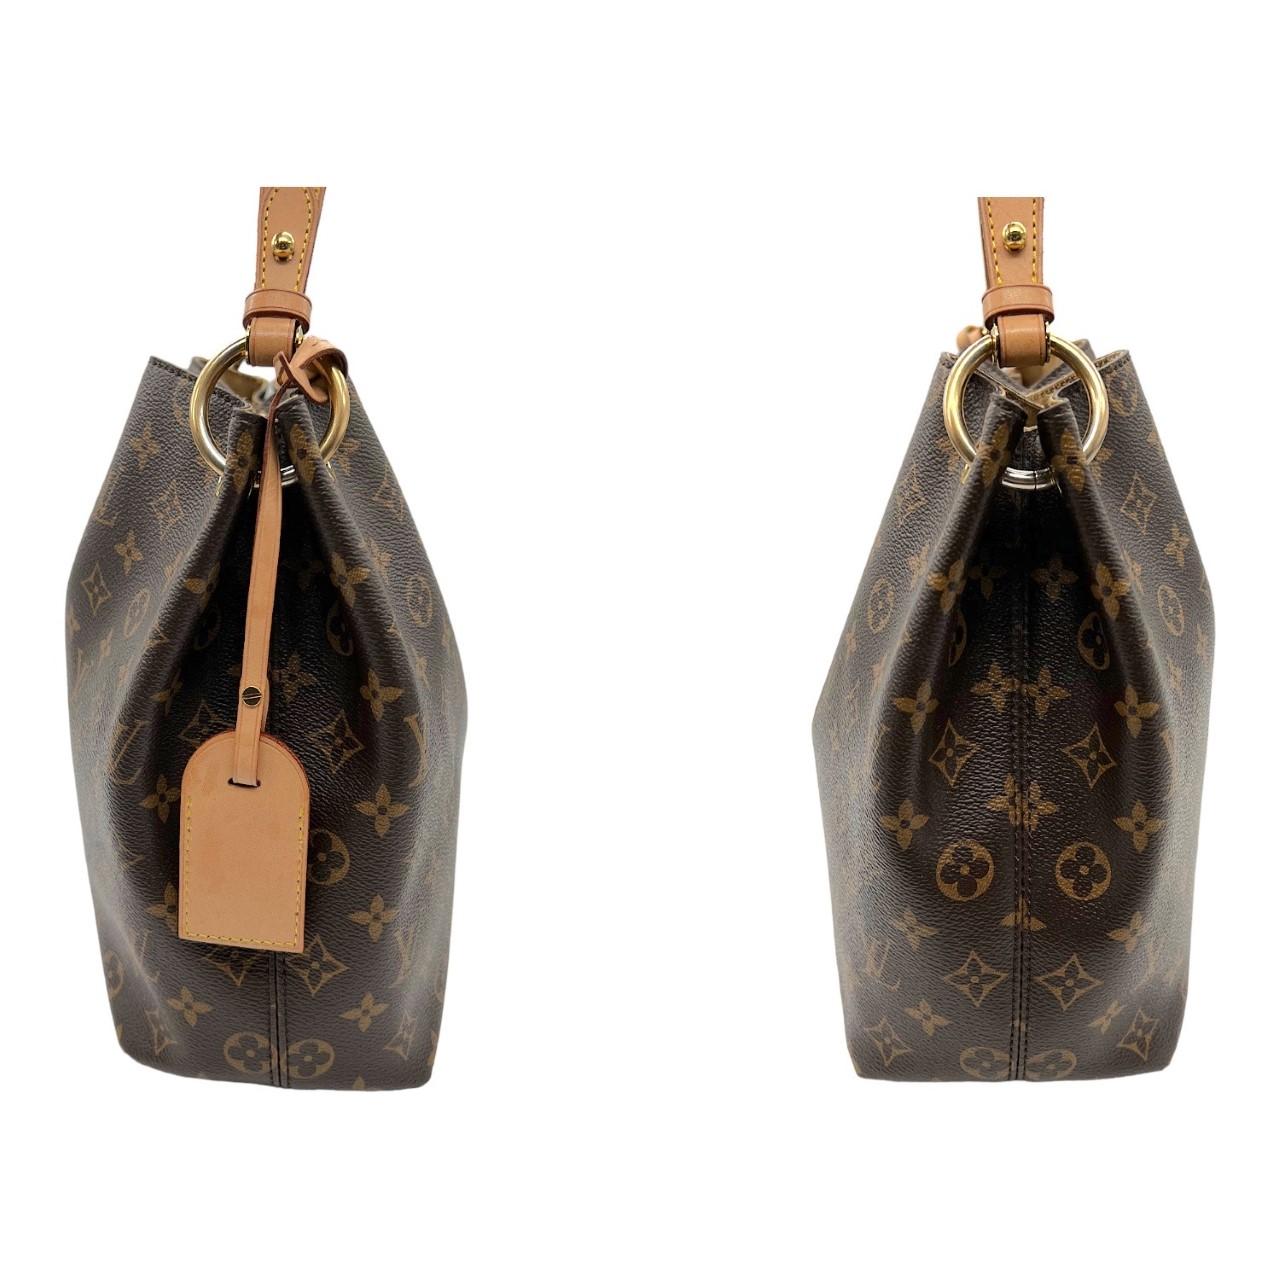 Louis Vuitton Monogram Graceful PM Hobo In Excellent Condition For Sale In Scottsdale, AZ